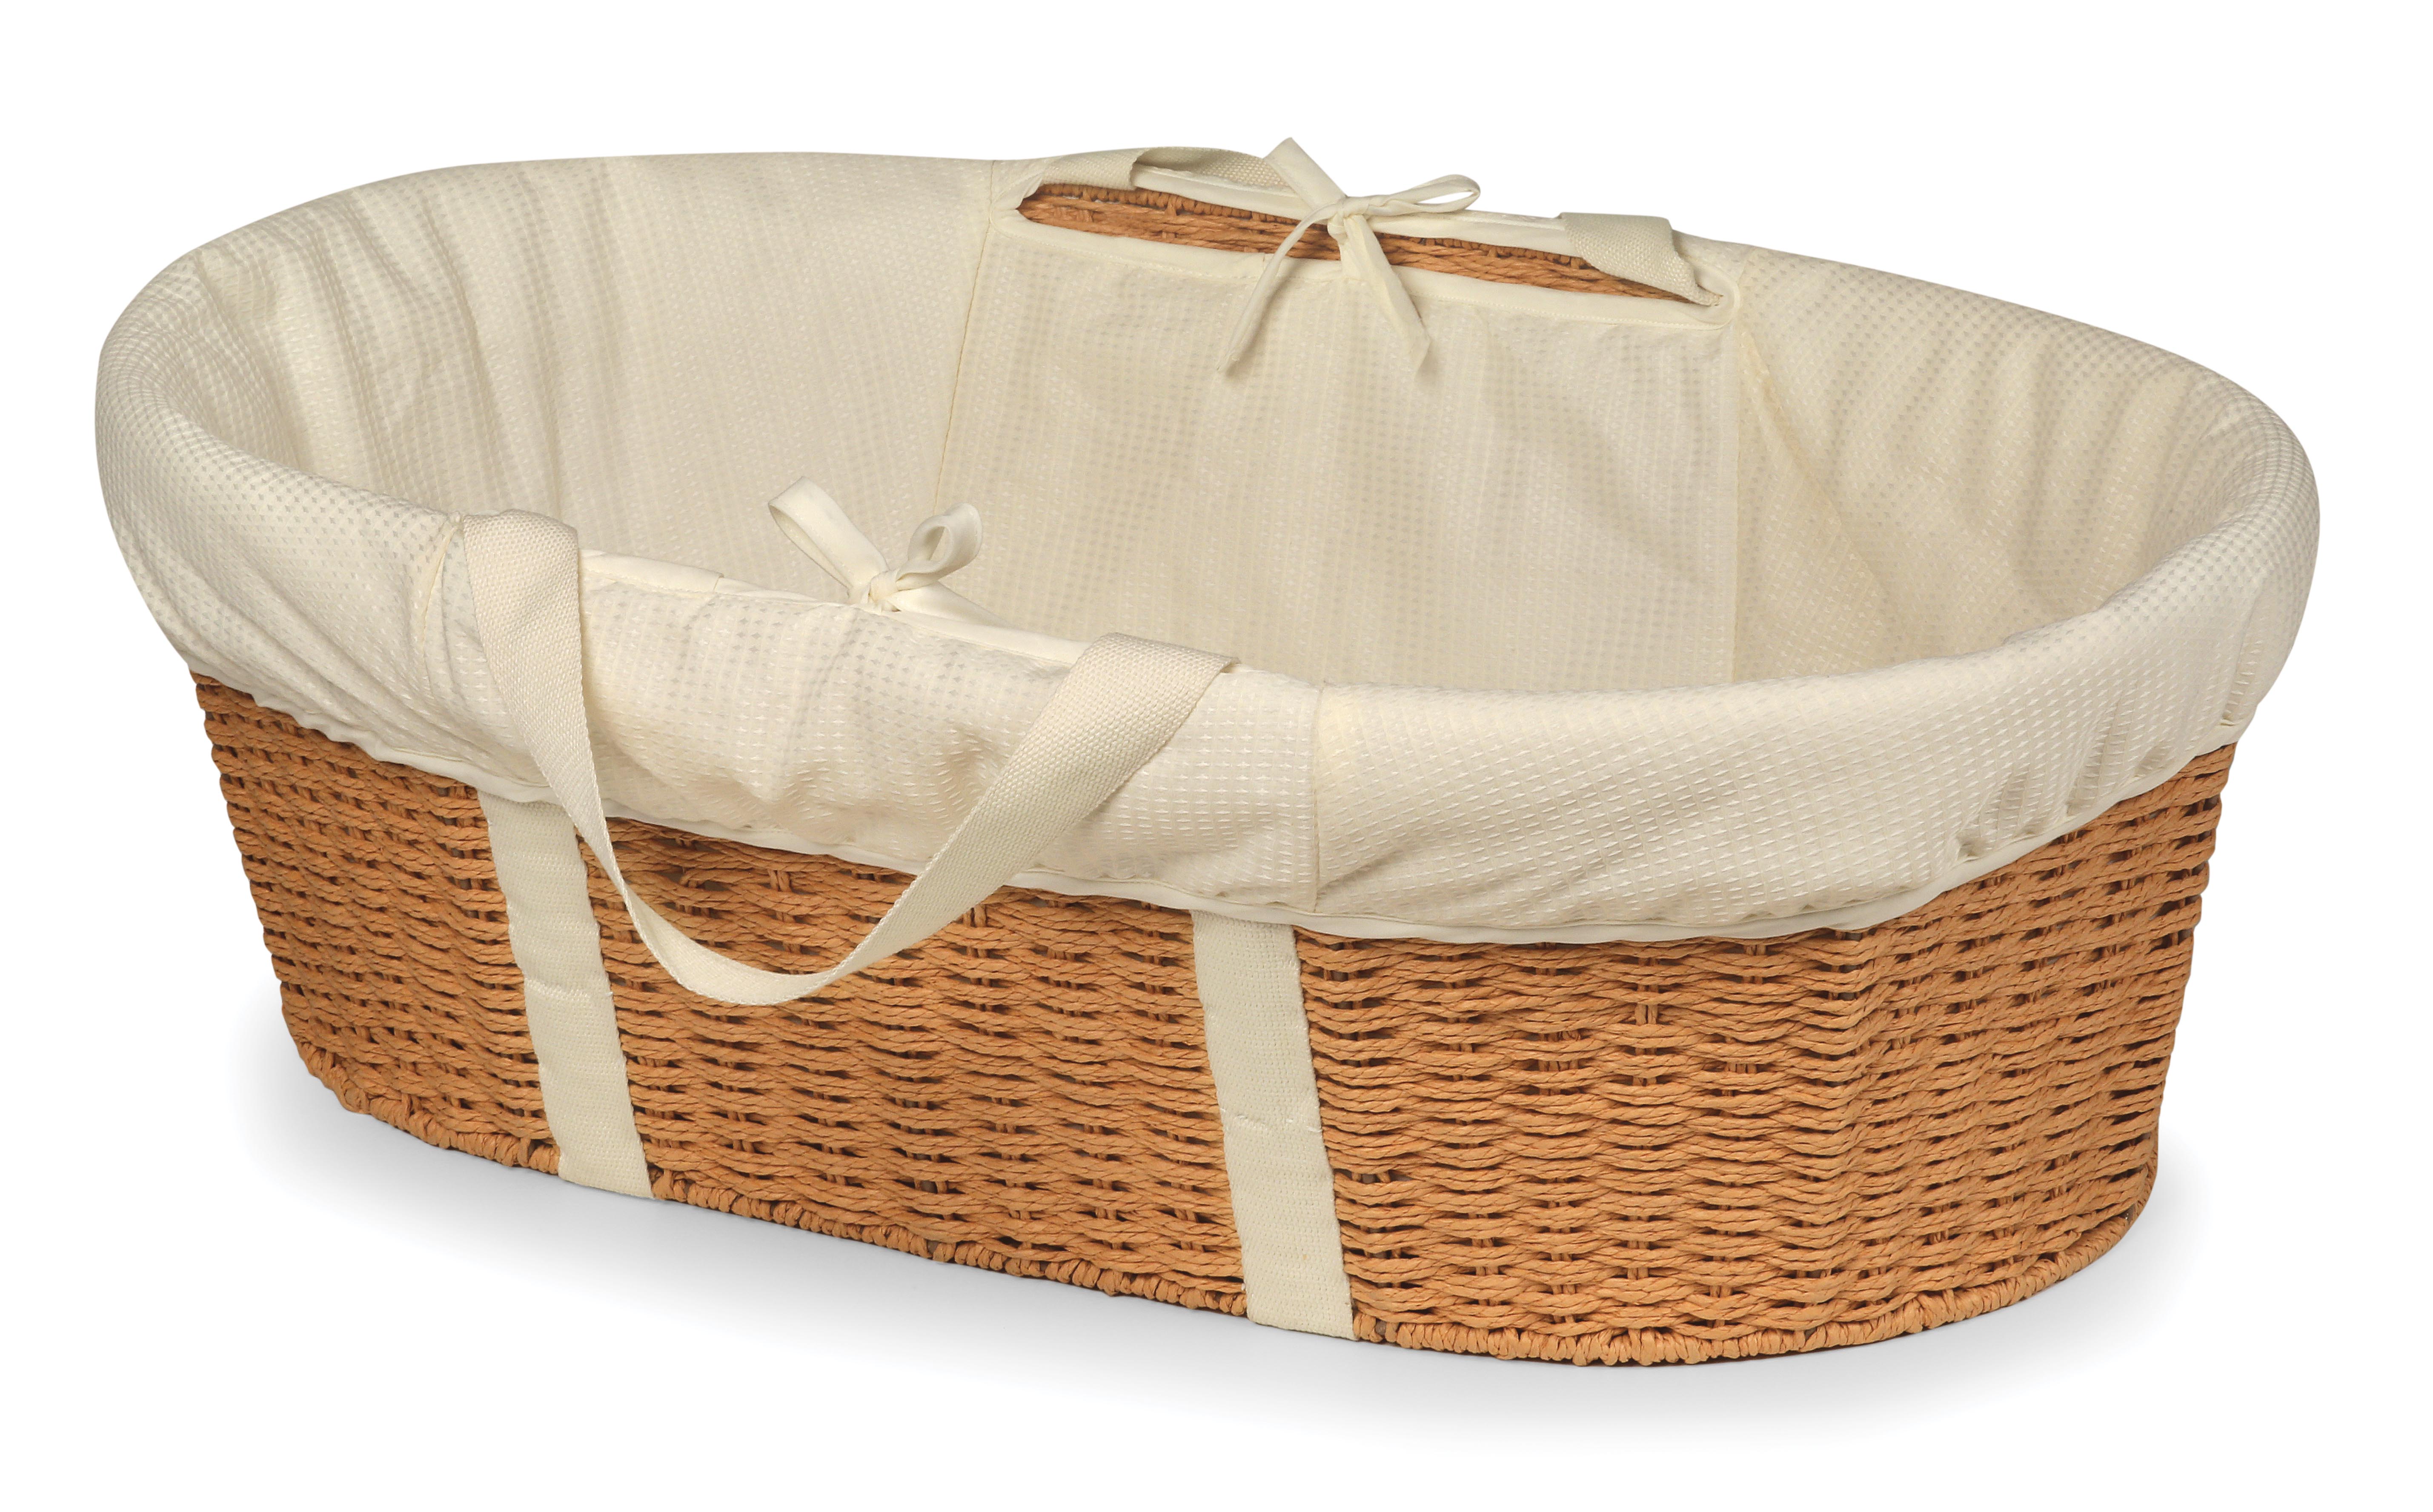 Wicker-Look Woven Baby Moses Changing Basket - Natural/Ecru